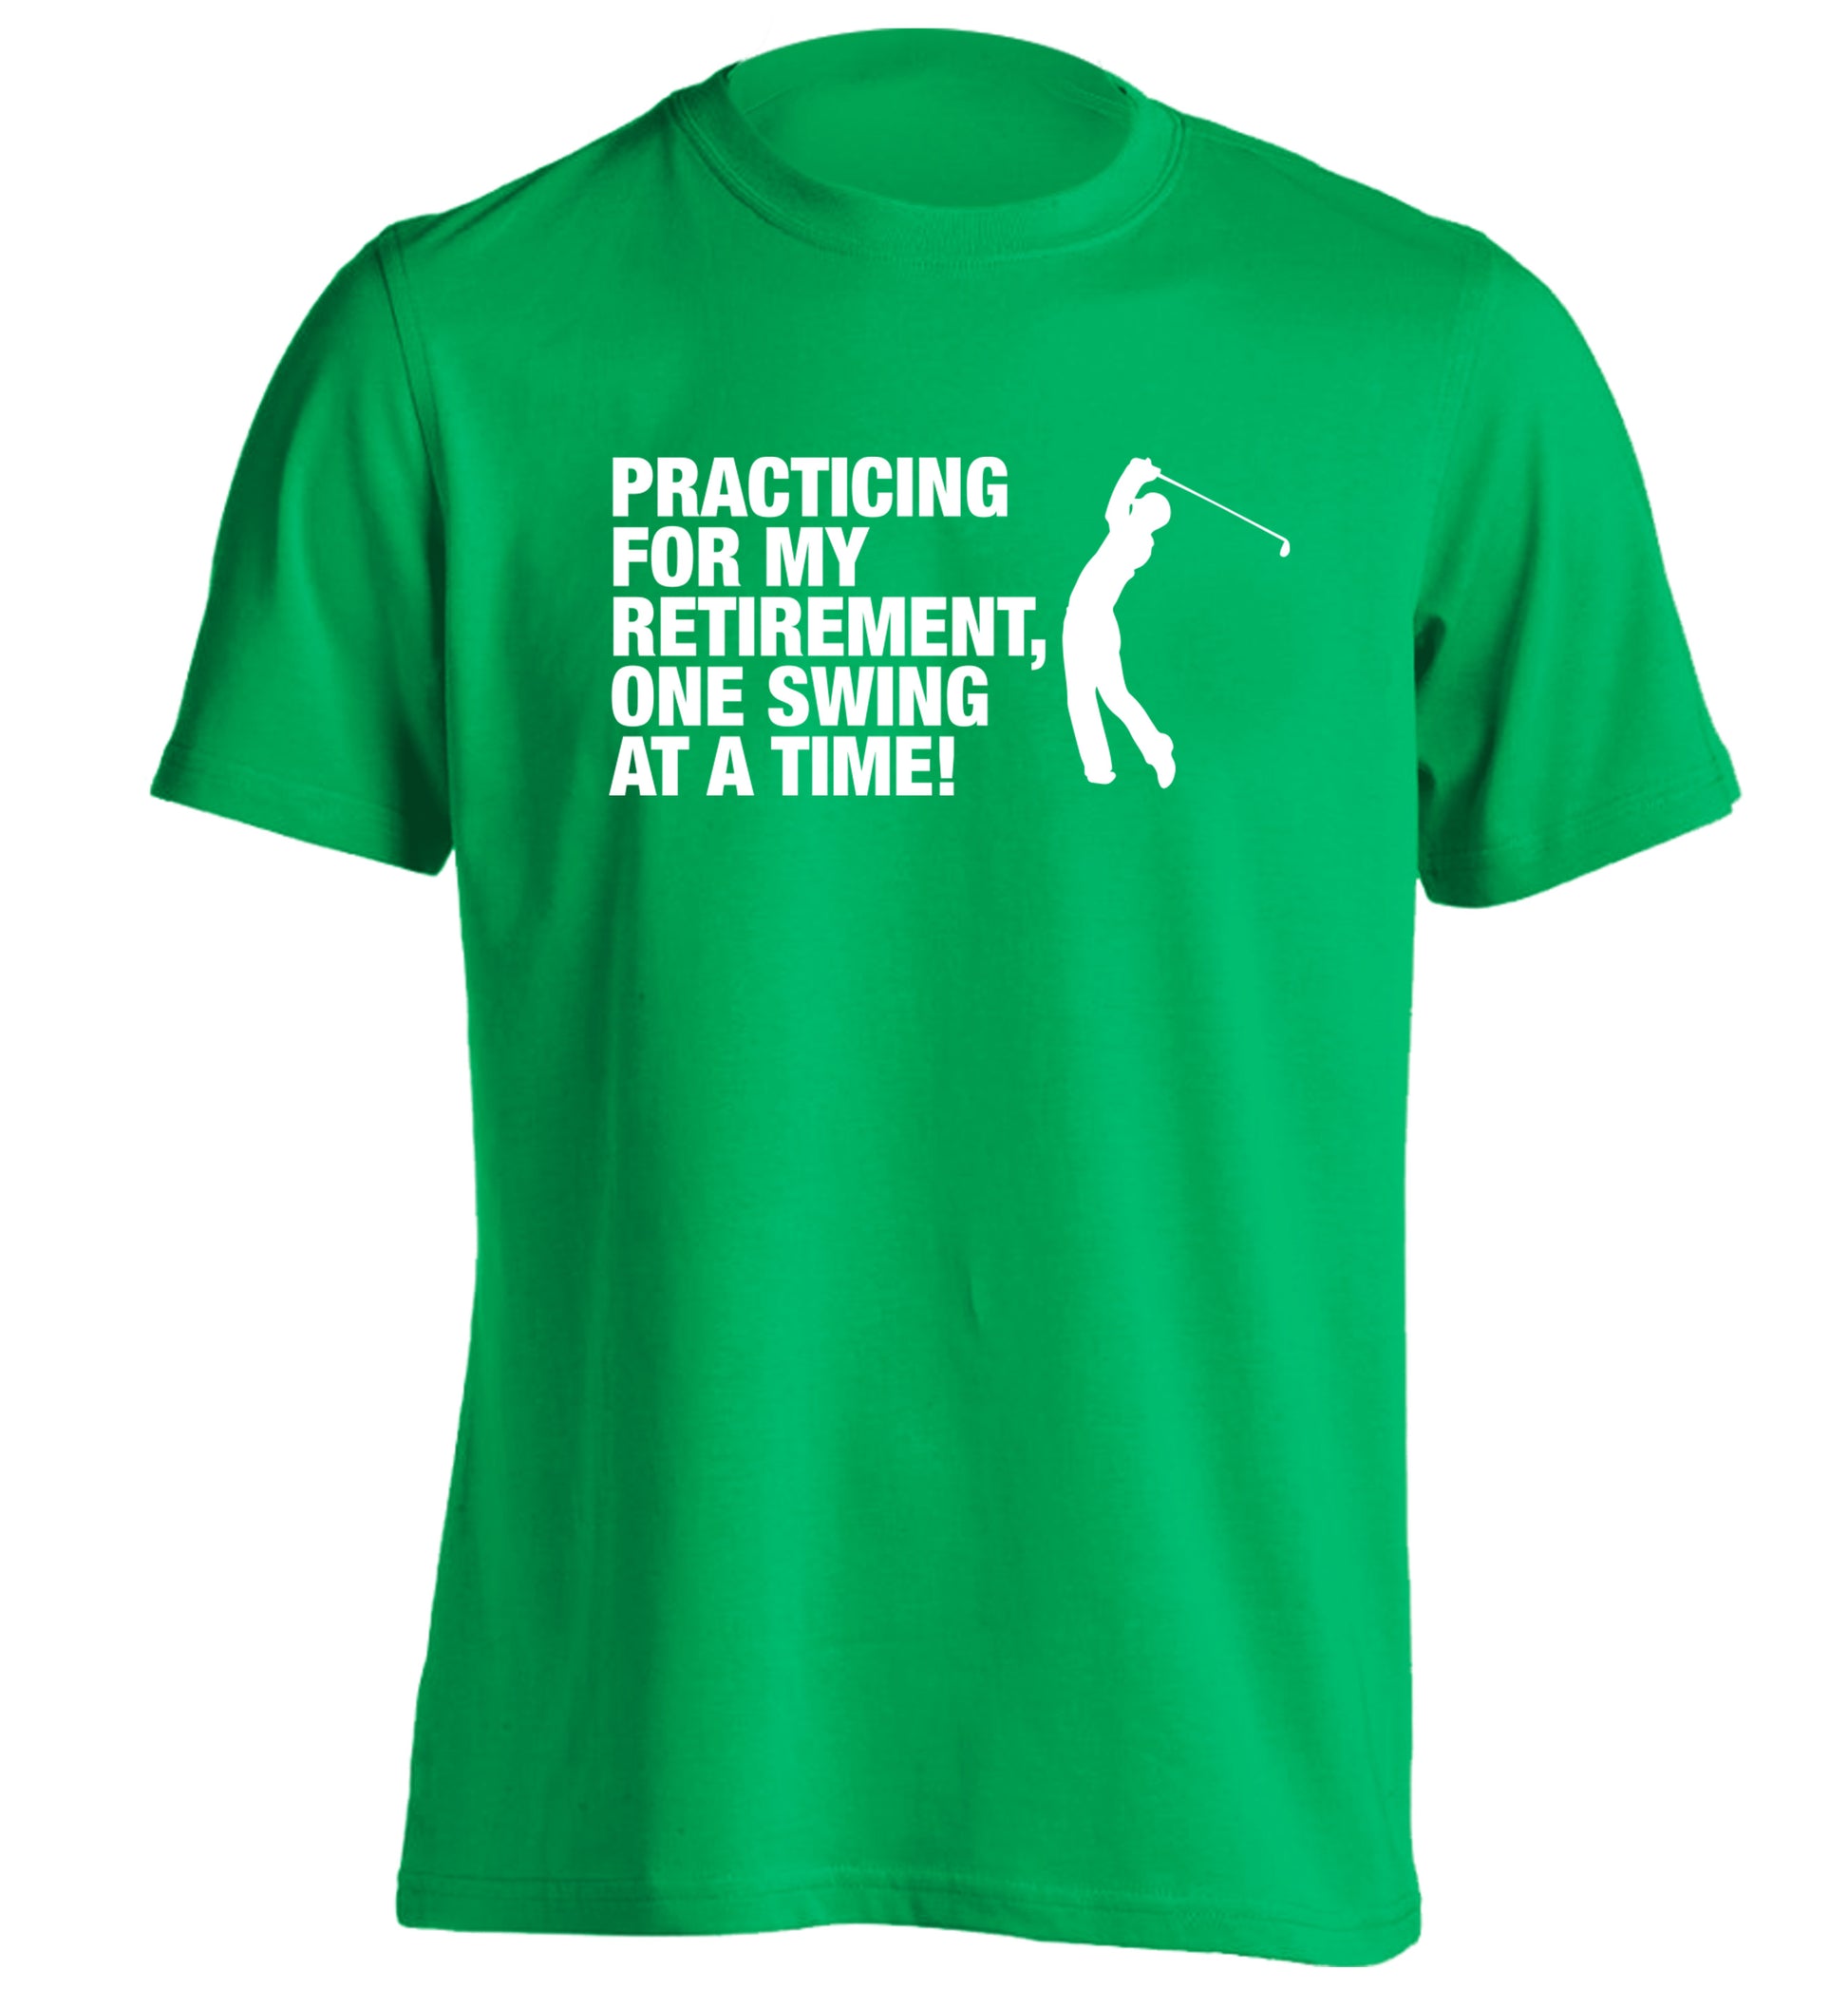 Practicing for my retirement one swing at a time adults unisex green Tshirt 2XL